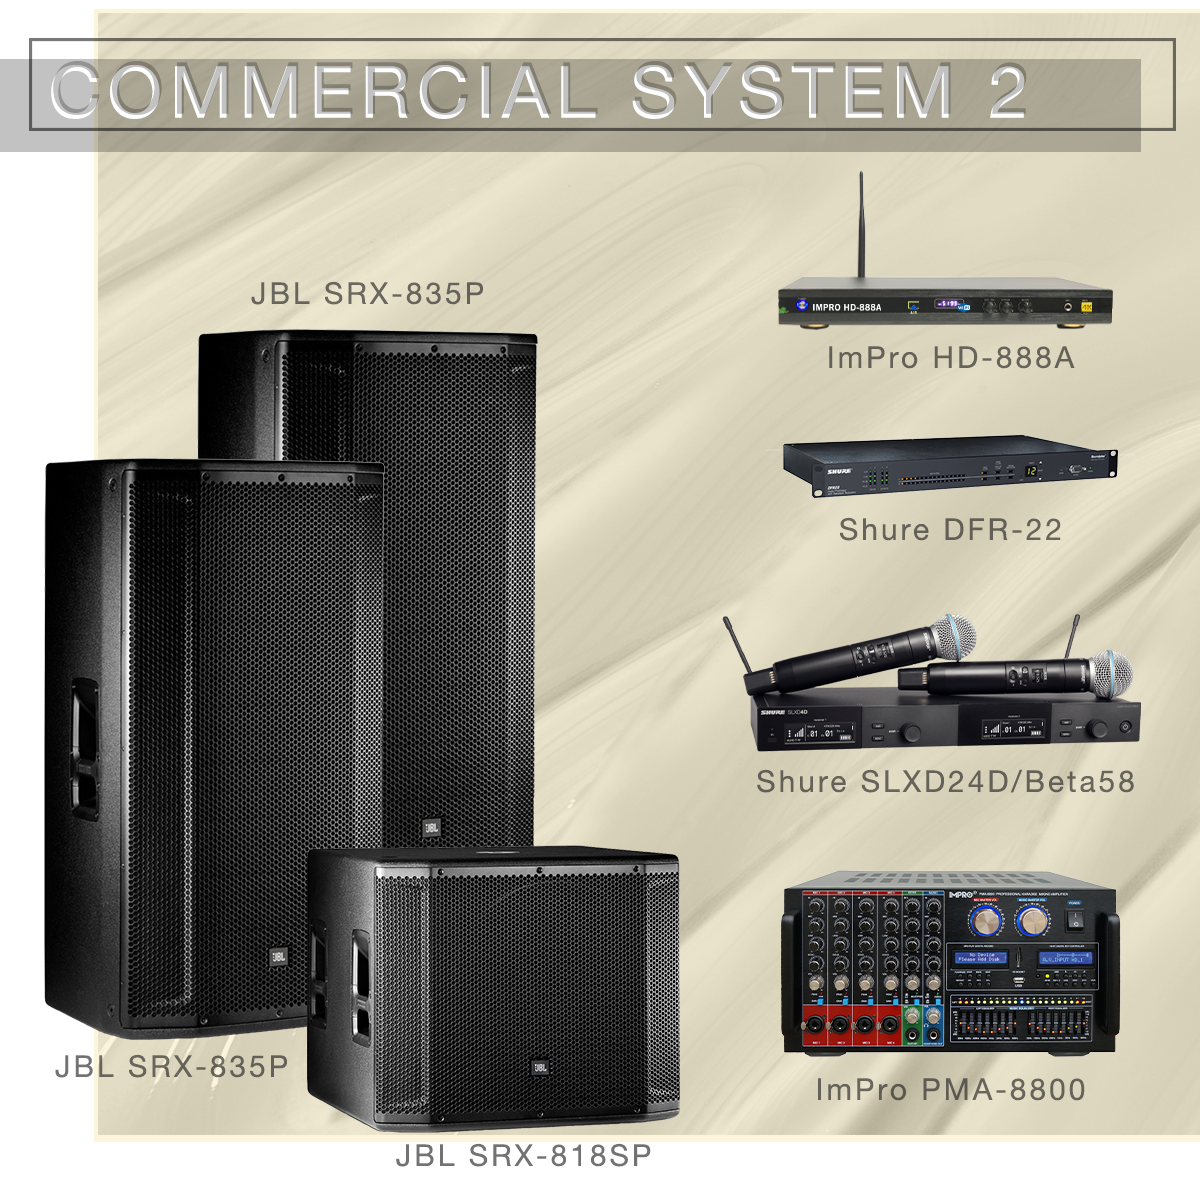 Commercial System 2 Karaoke System Package with JBL Speakers, Shure Microphones, and Karaoke Player